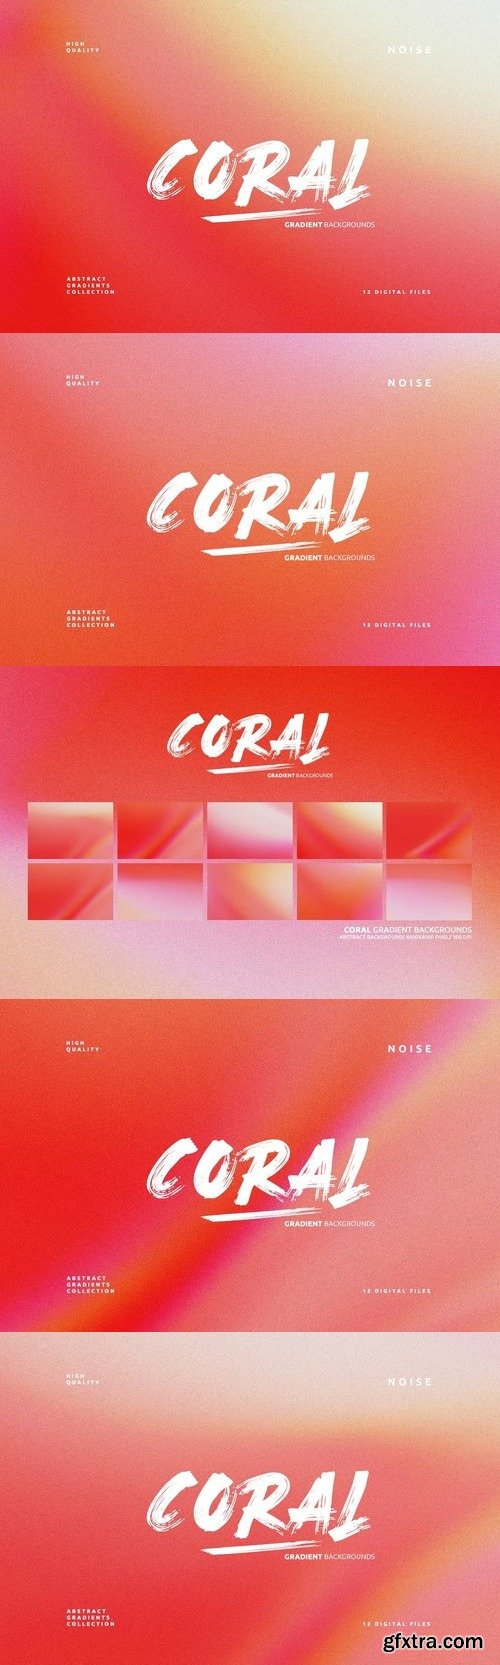 Coral Gradient Backgrounds 4ZY6WDY